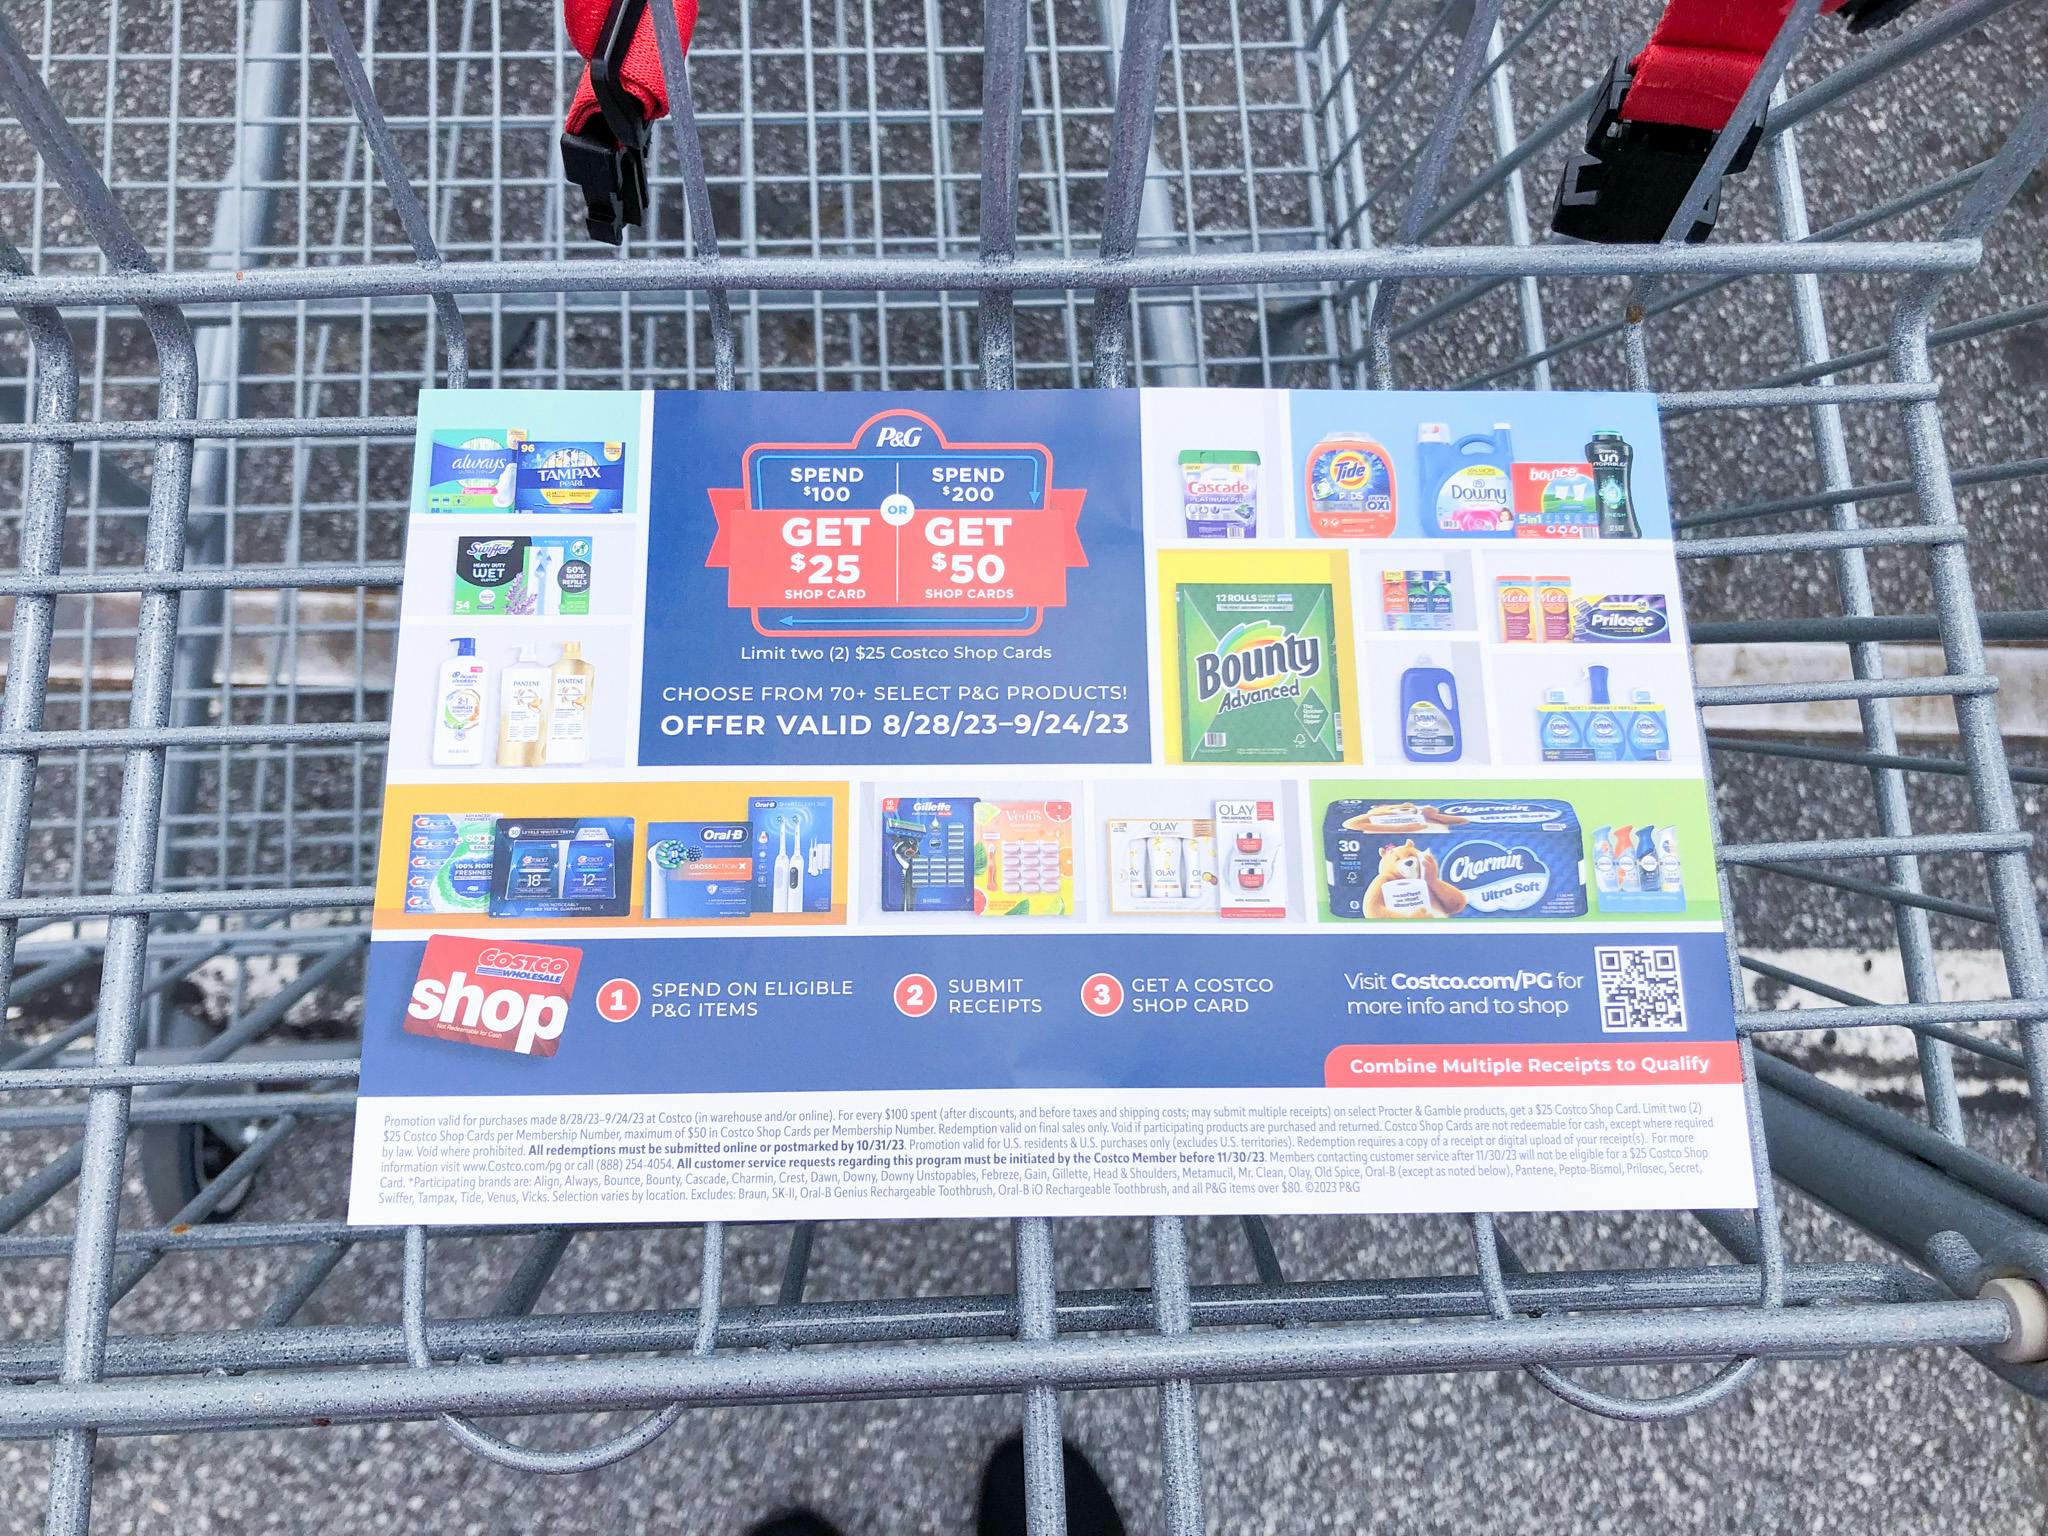 stock-up-the-savings-with-costco-p-g-rebate-deals-the-krazy-coupon-lady